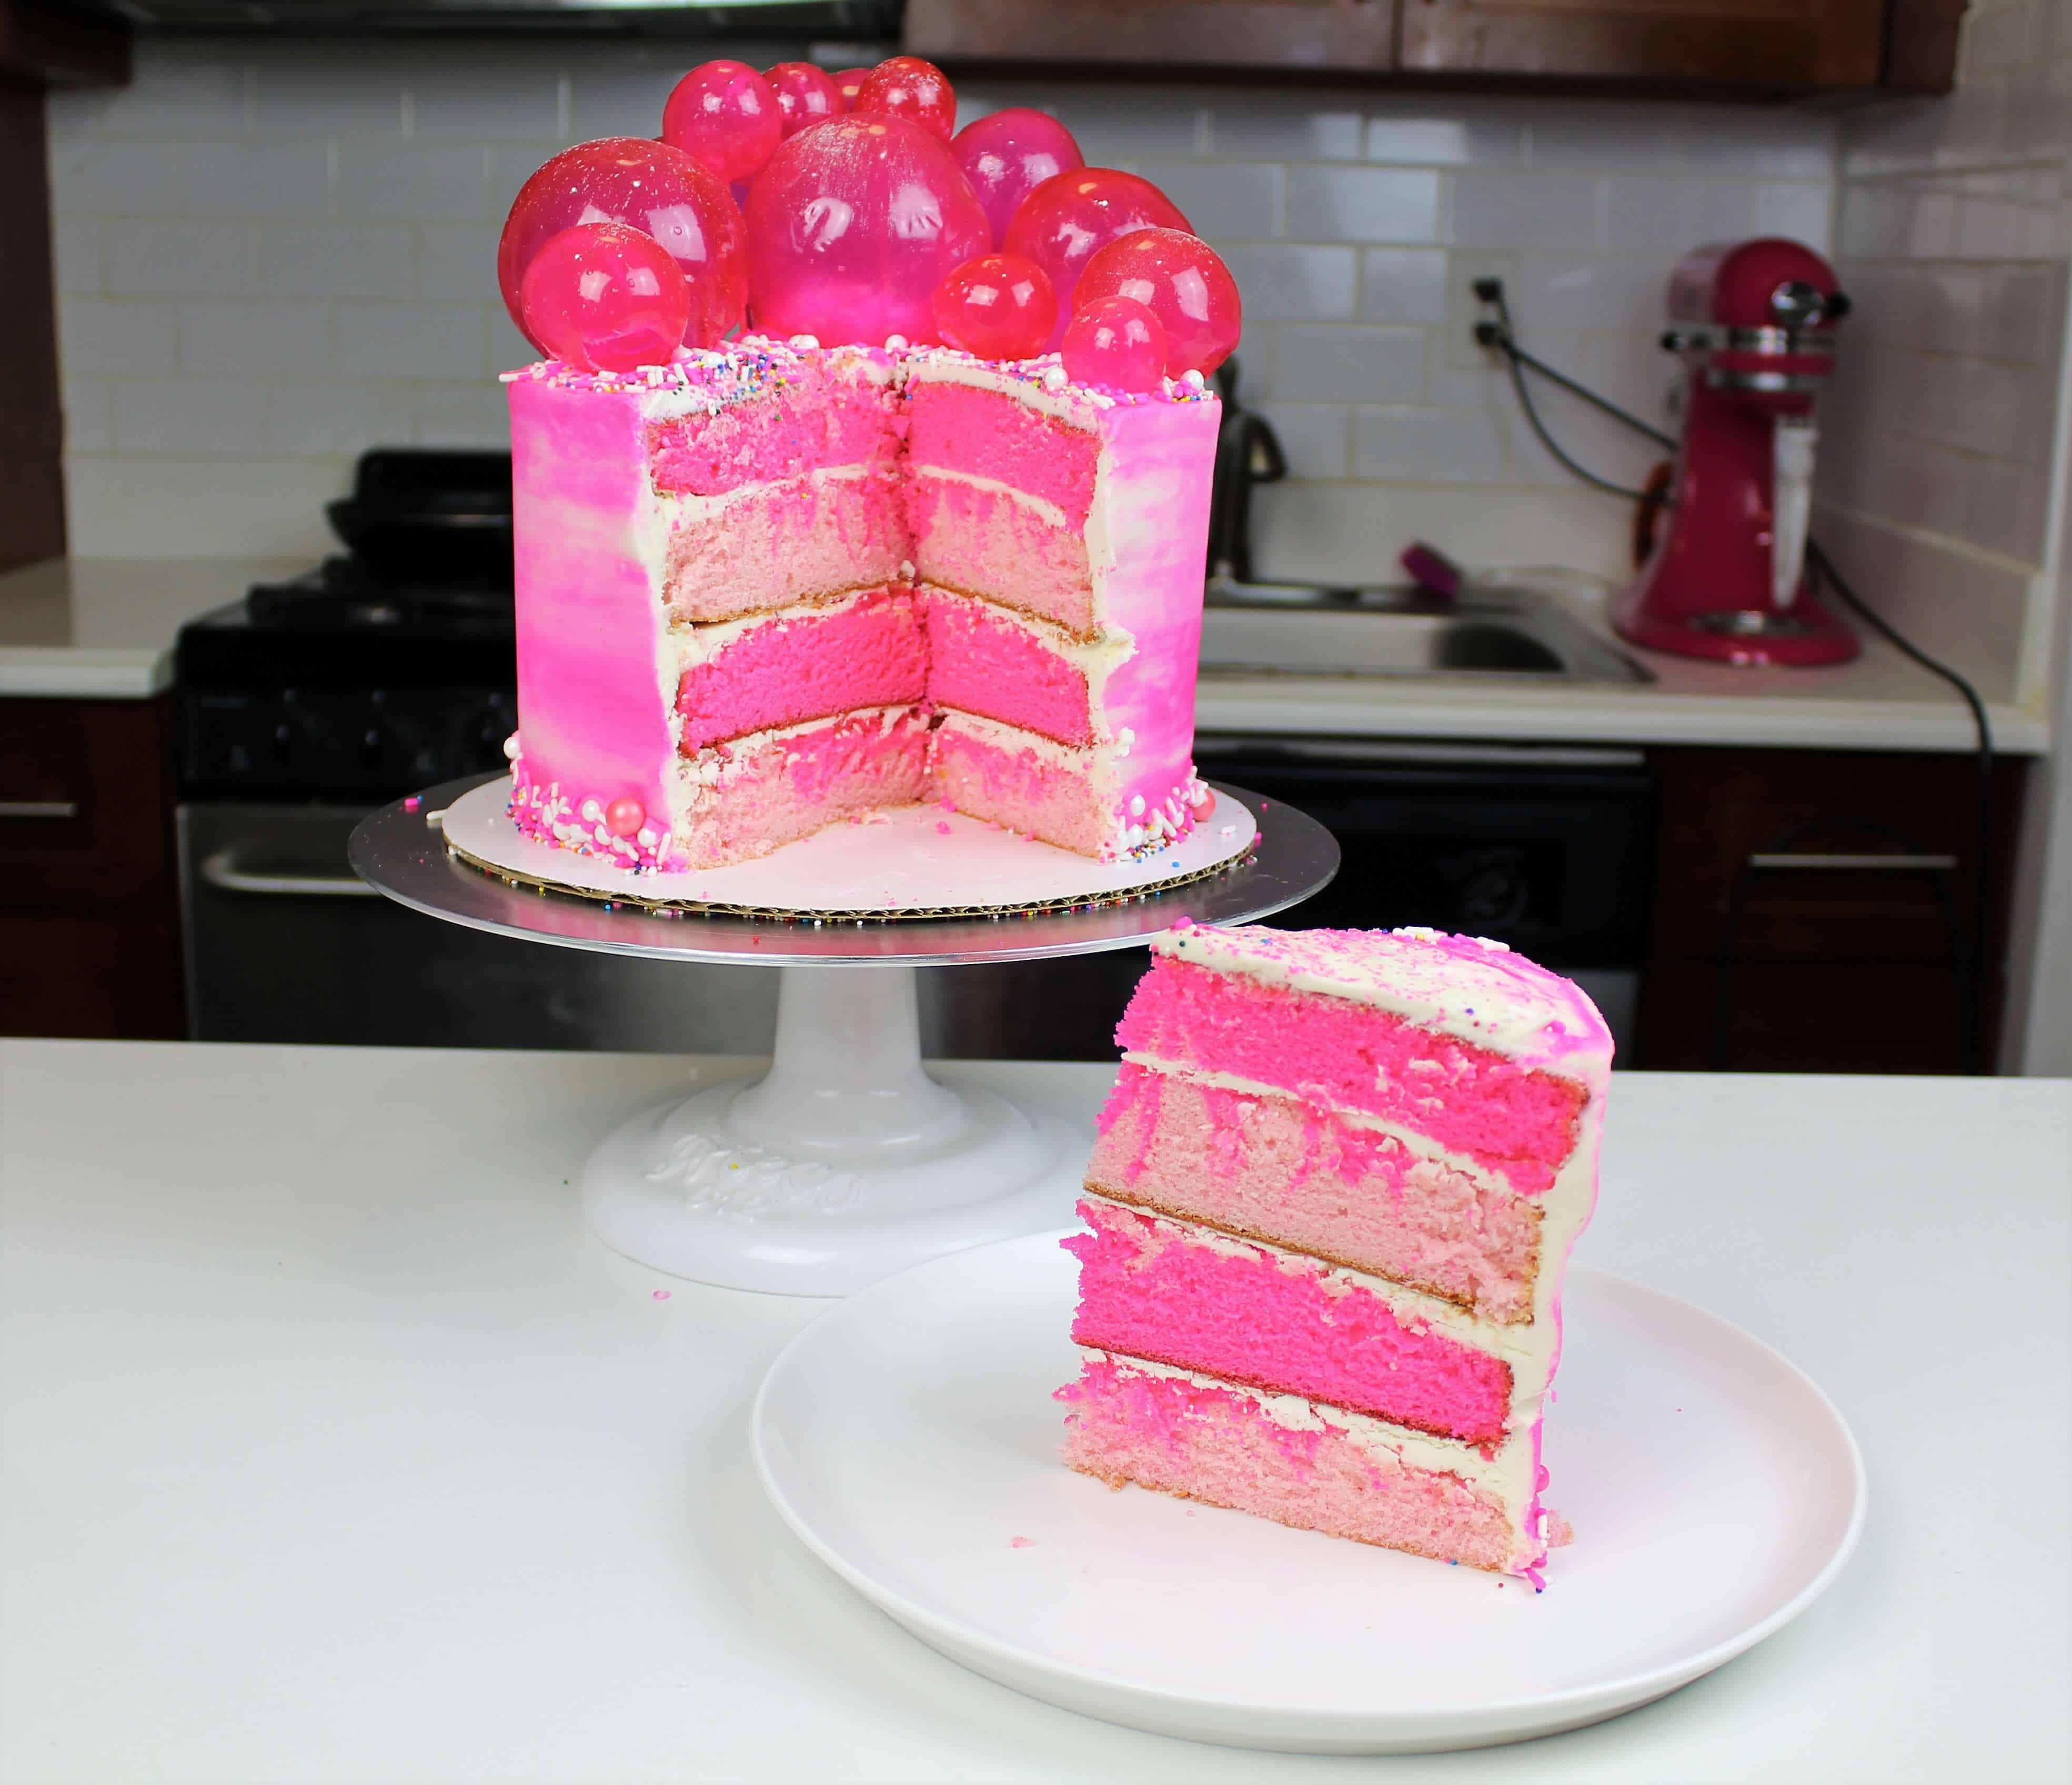 image of a bubble gum cake decorated with gelatin bubbles